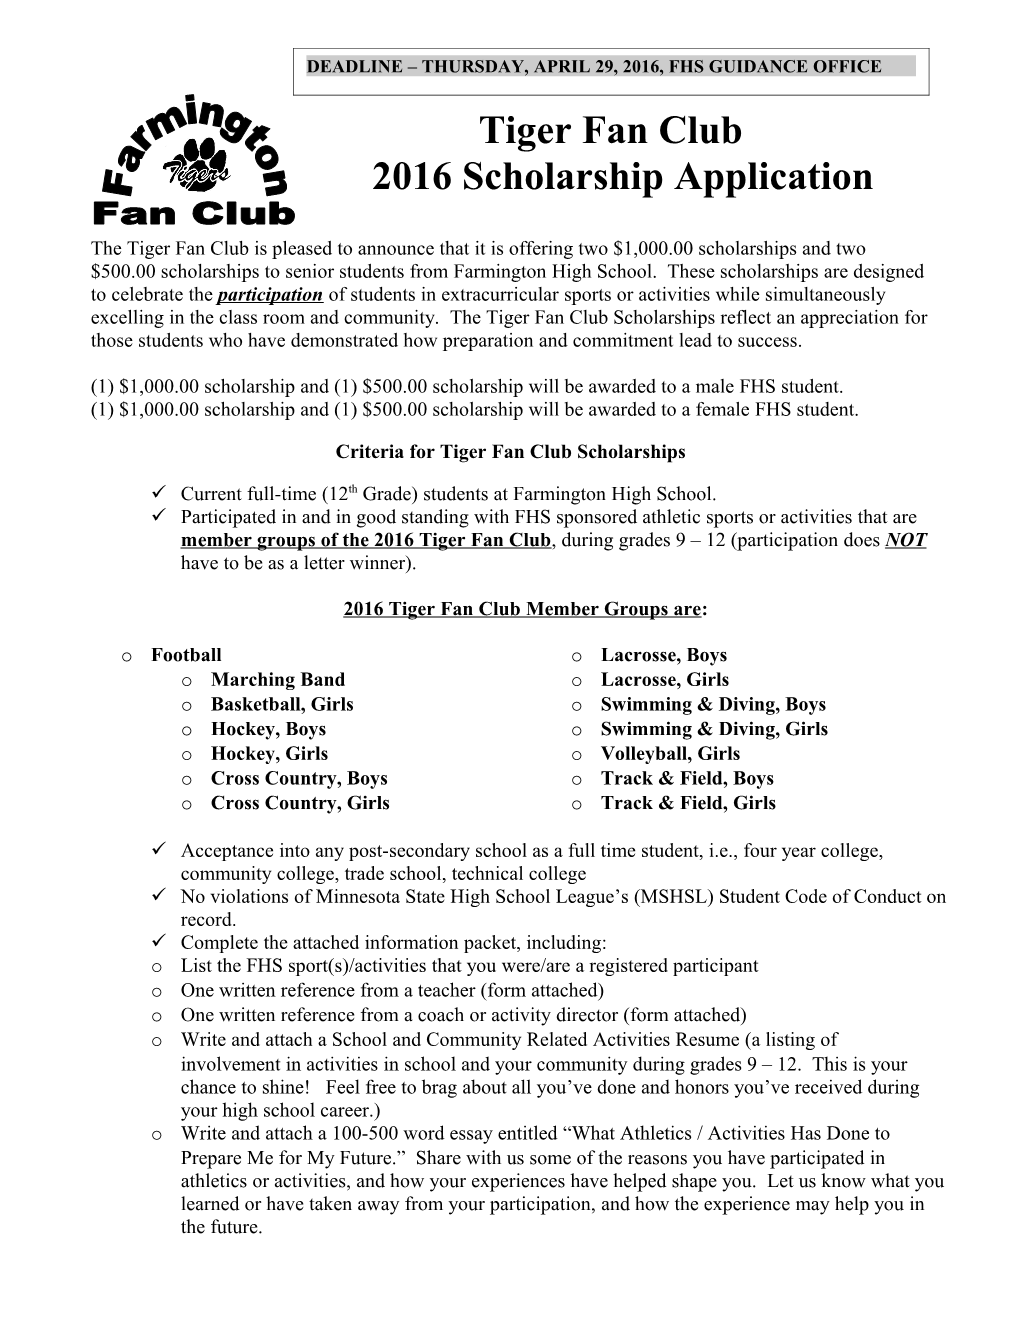 (1) $1,000.00 Scholarship and (1) $500.00 Scholarship Will Be Awarded to a Male FHS Student